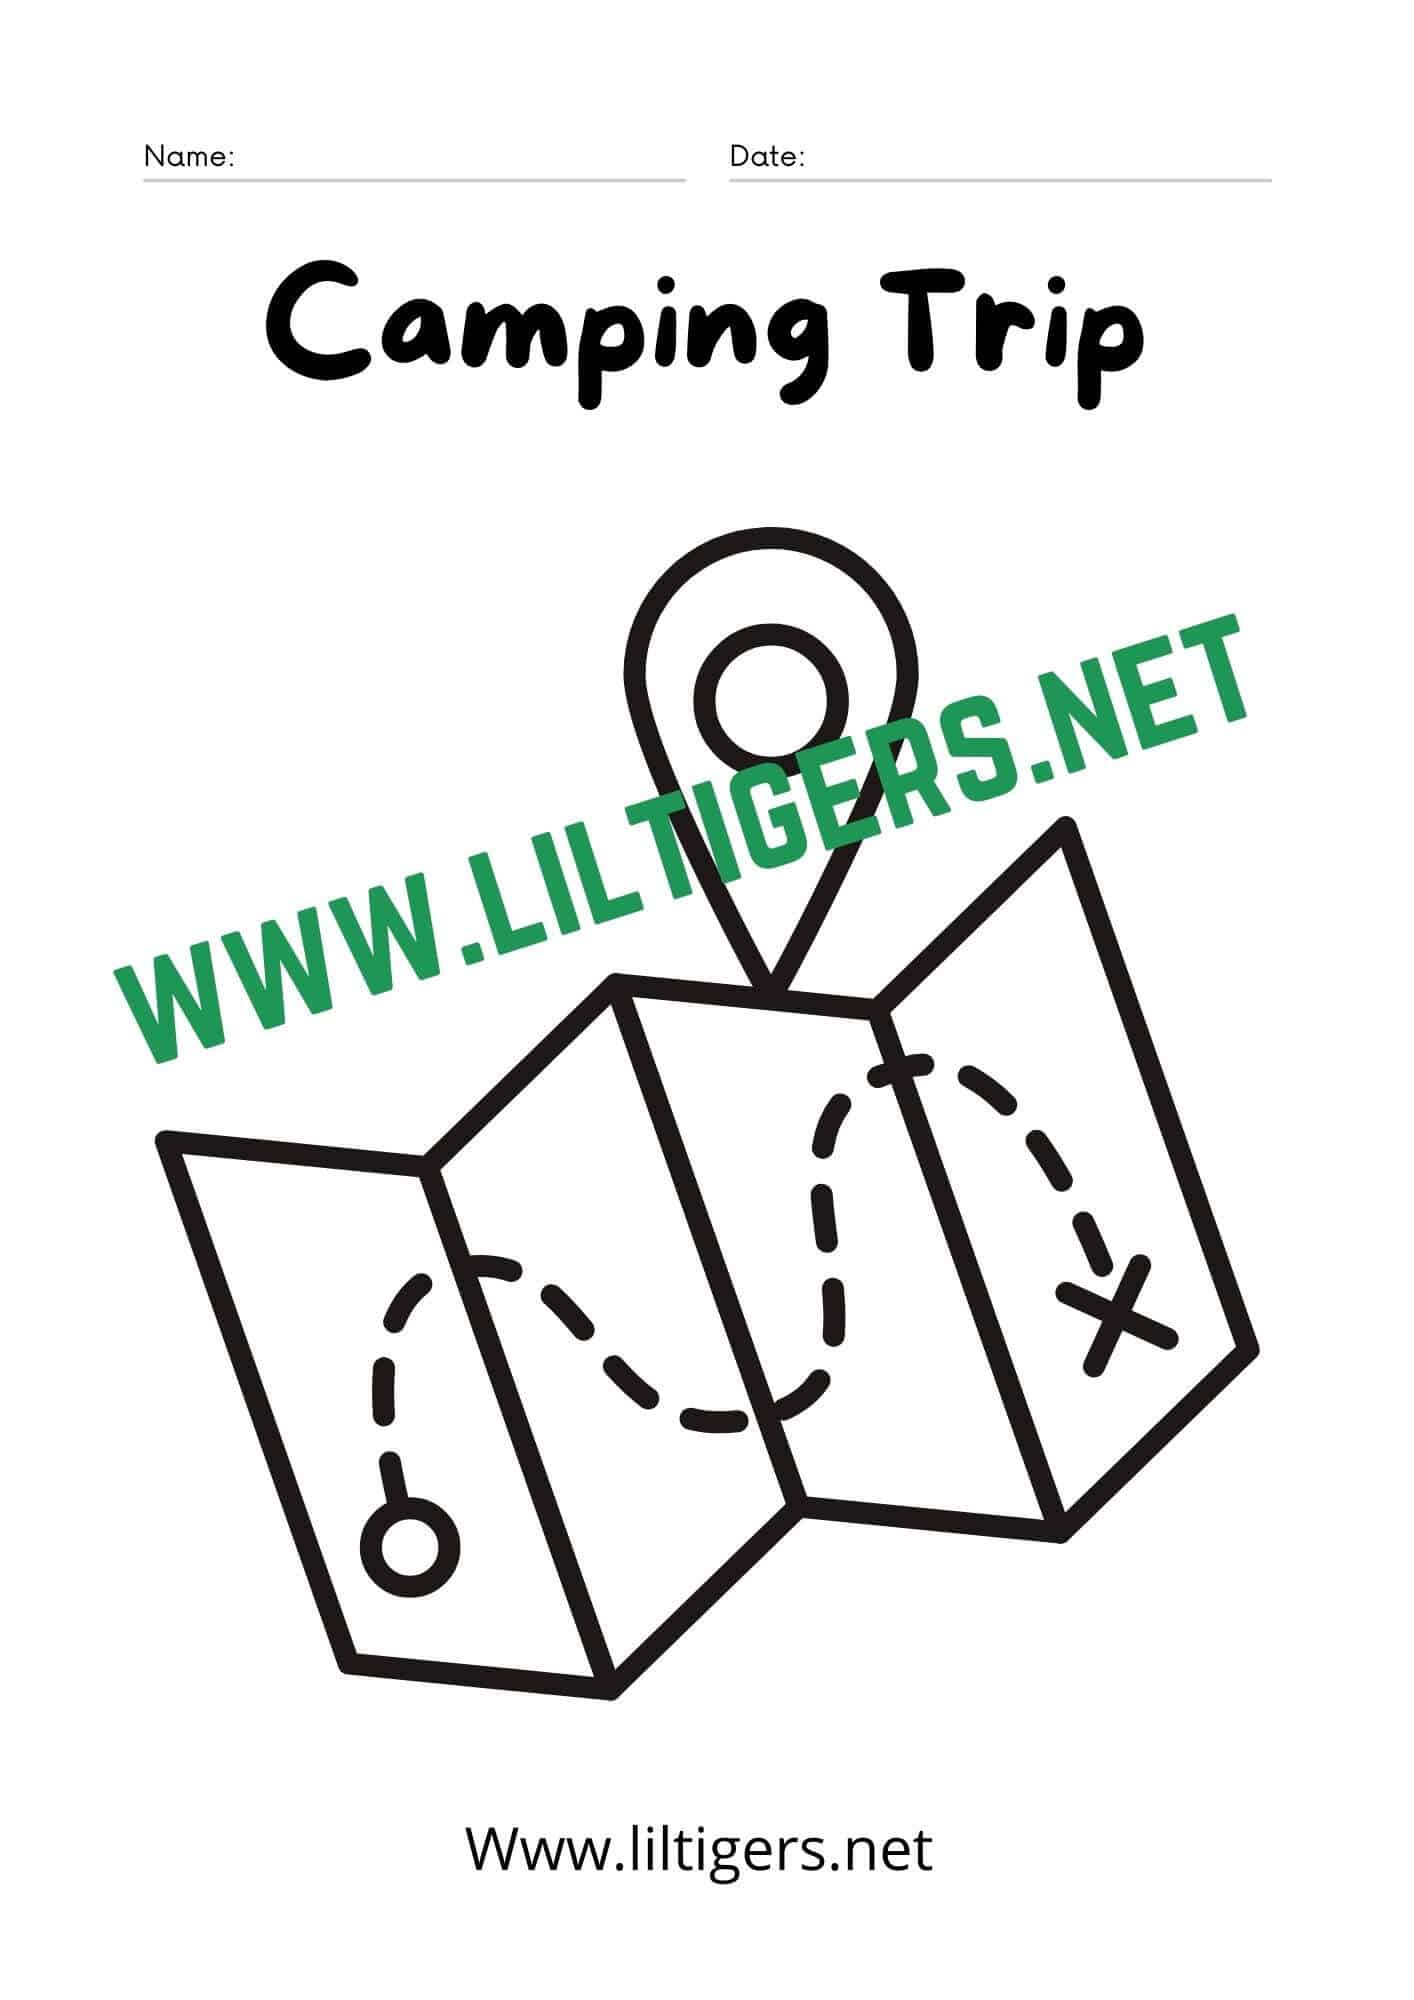 Camping map coloring page